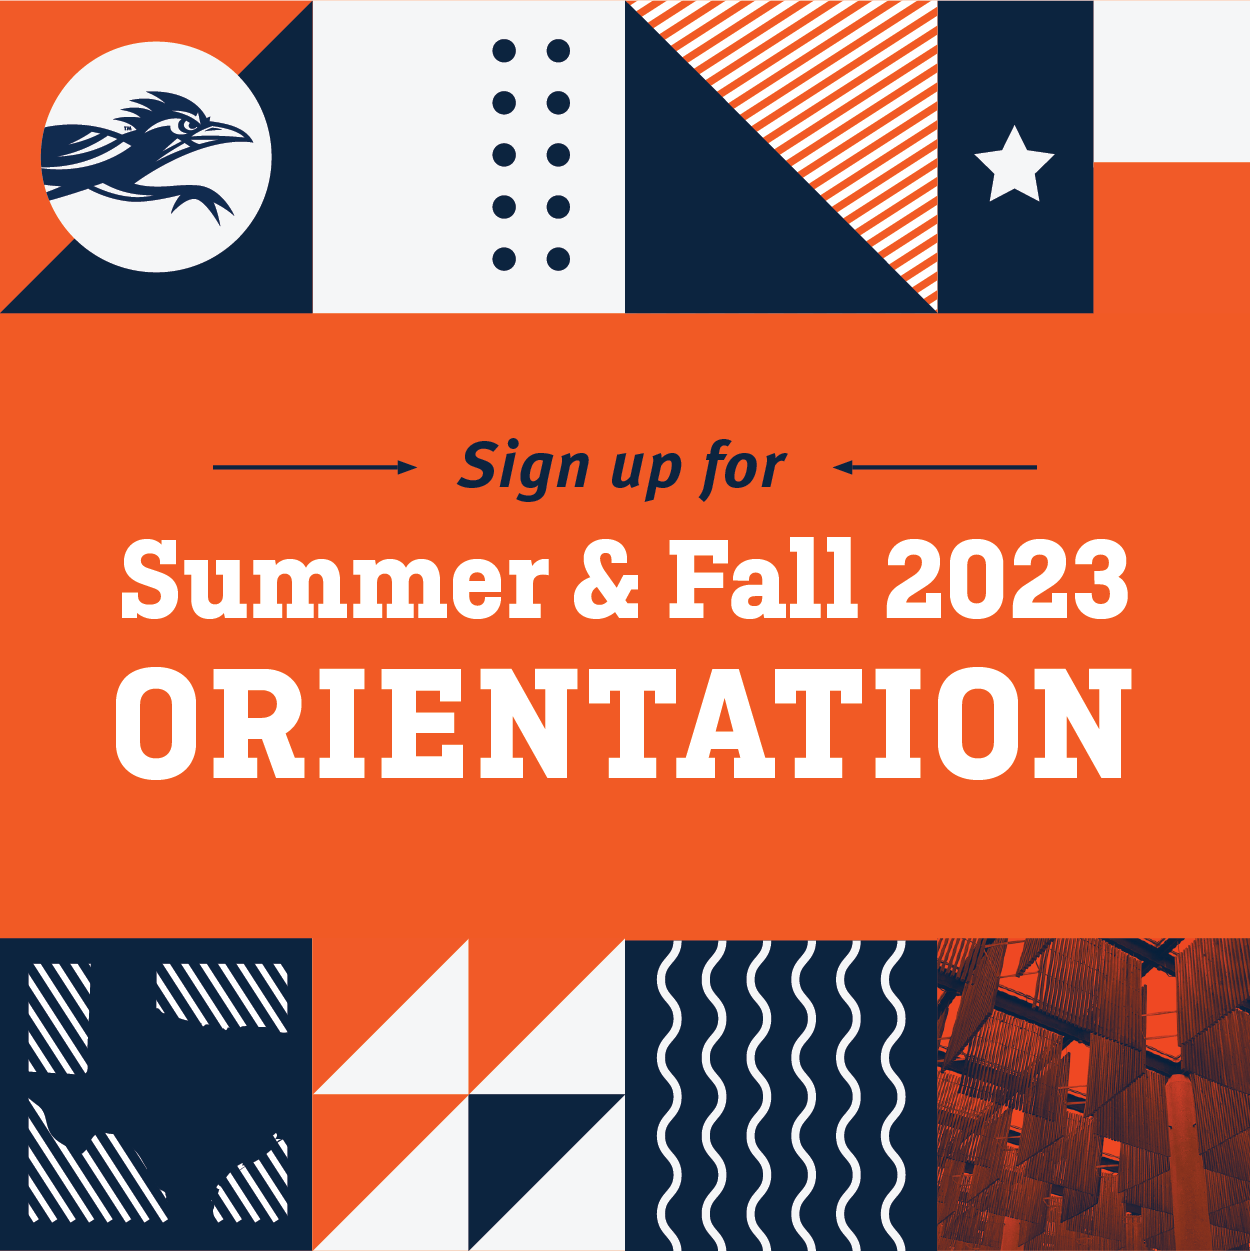 Sign up for orientation!